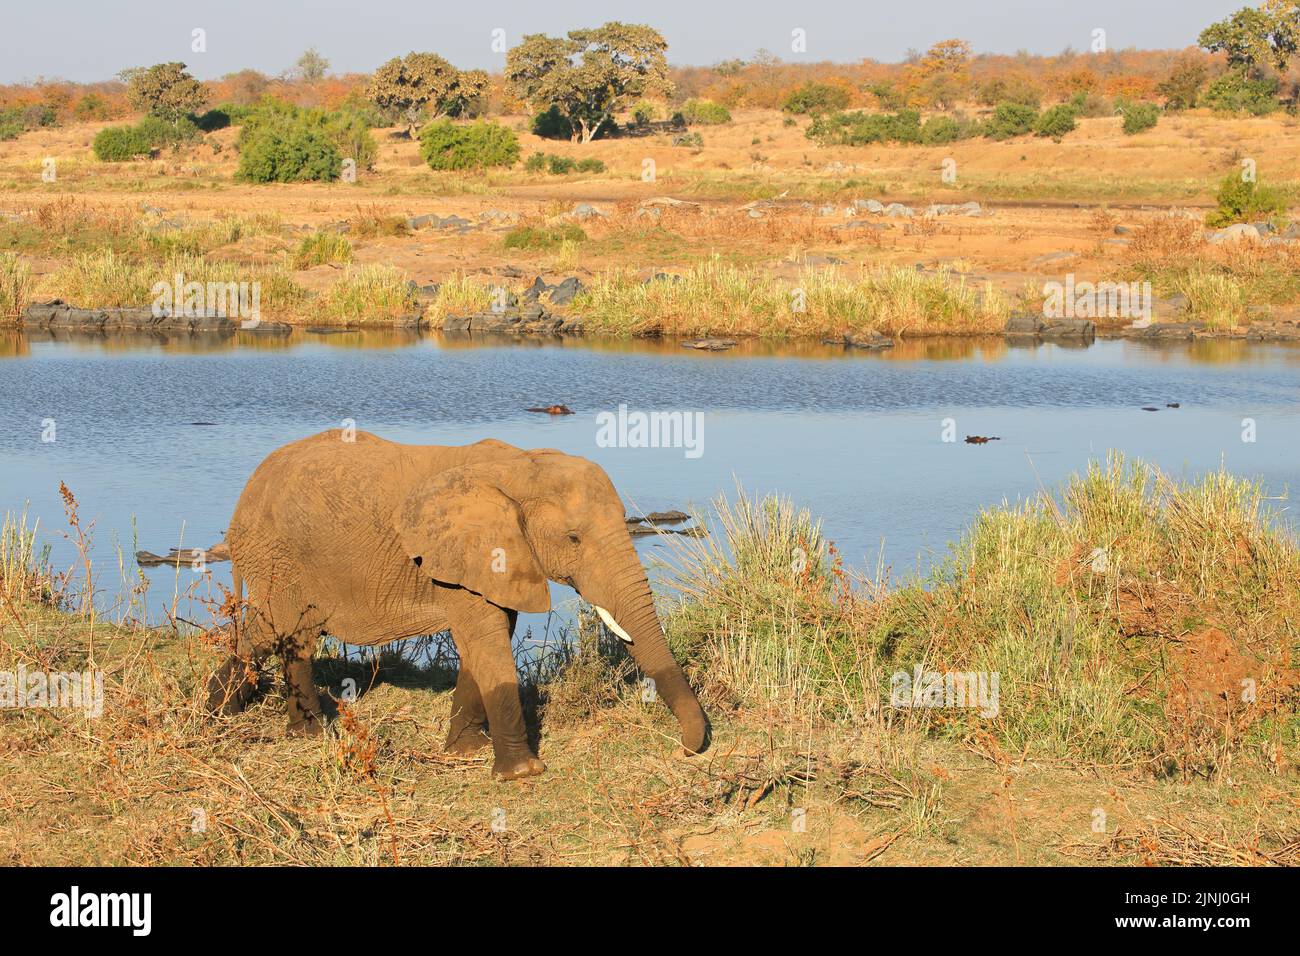 African elephant (Loxodonta africana) in natural habitat, Kruger National Park, South Africa Stock Photo